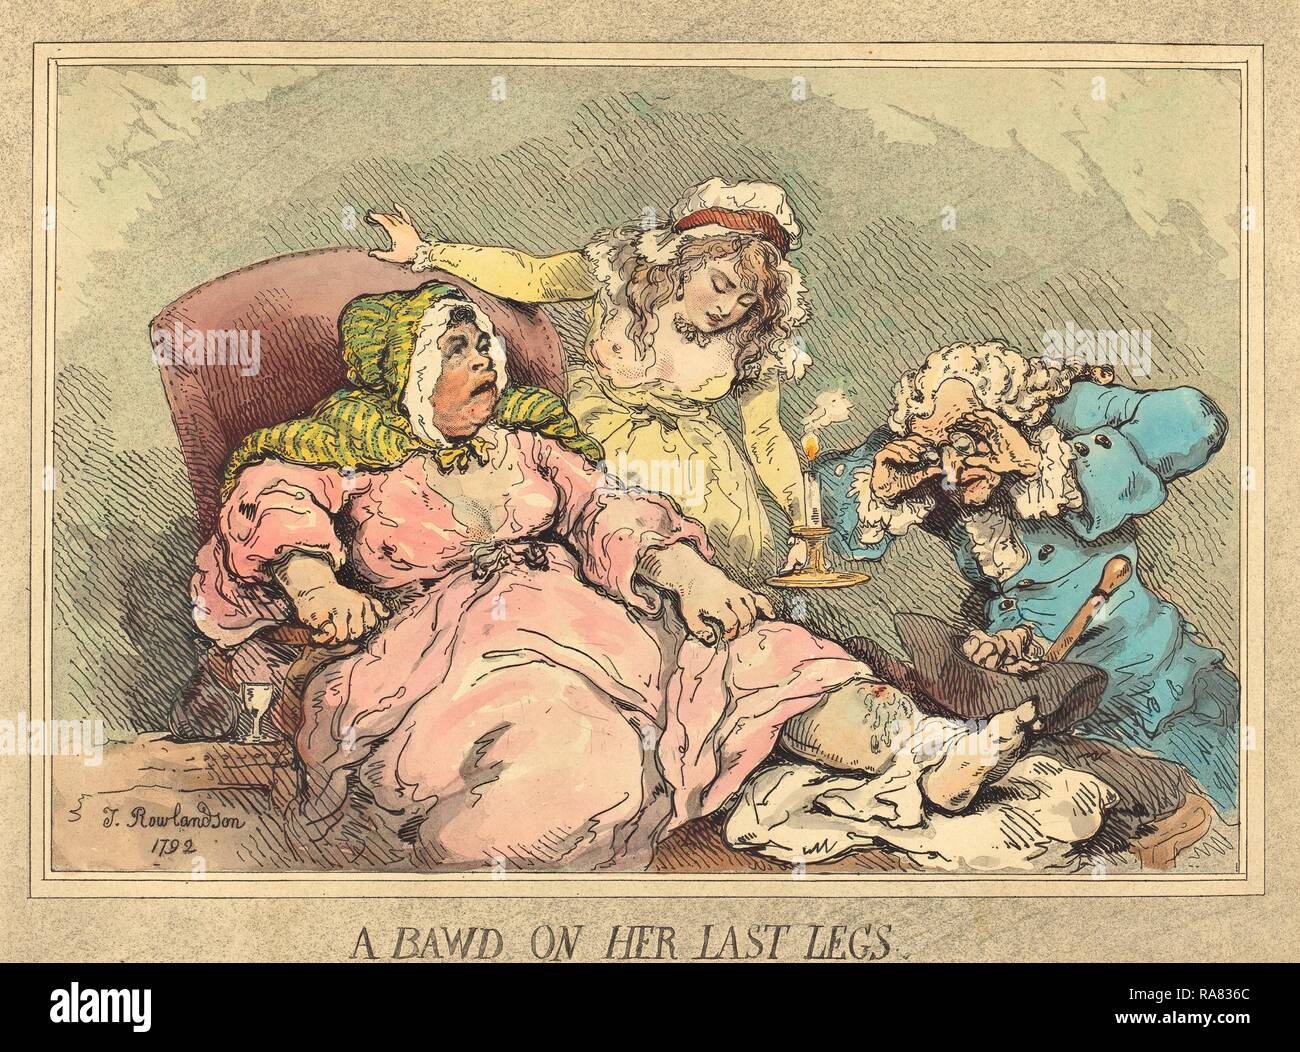 Thomas Rowlandson (British, 1756 - 1827), A Bawd on Her Last Legs, 1792, hand-colored etching and aquatint reimagined Stock Photo